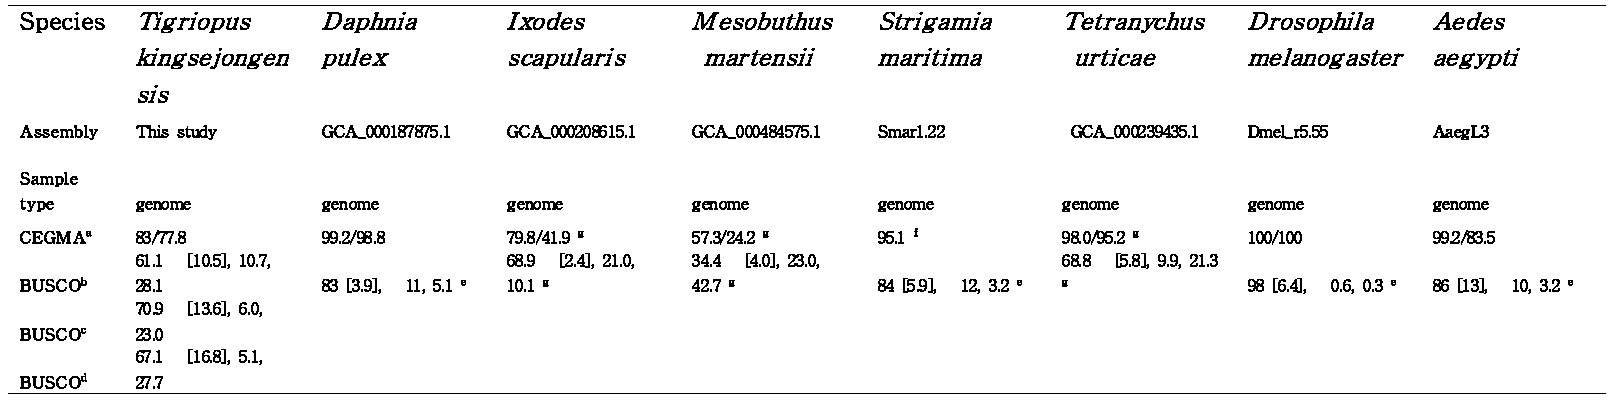 Tigriopus kingsejongensis genome completeness reports with the other arthropod genomes.